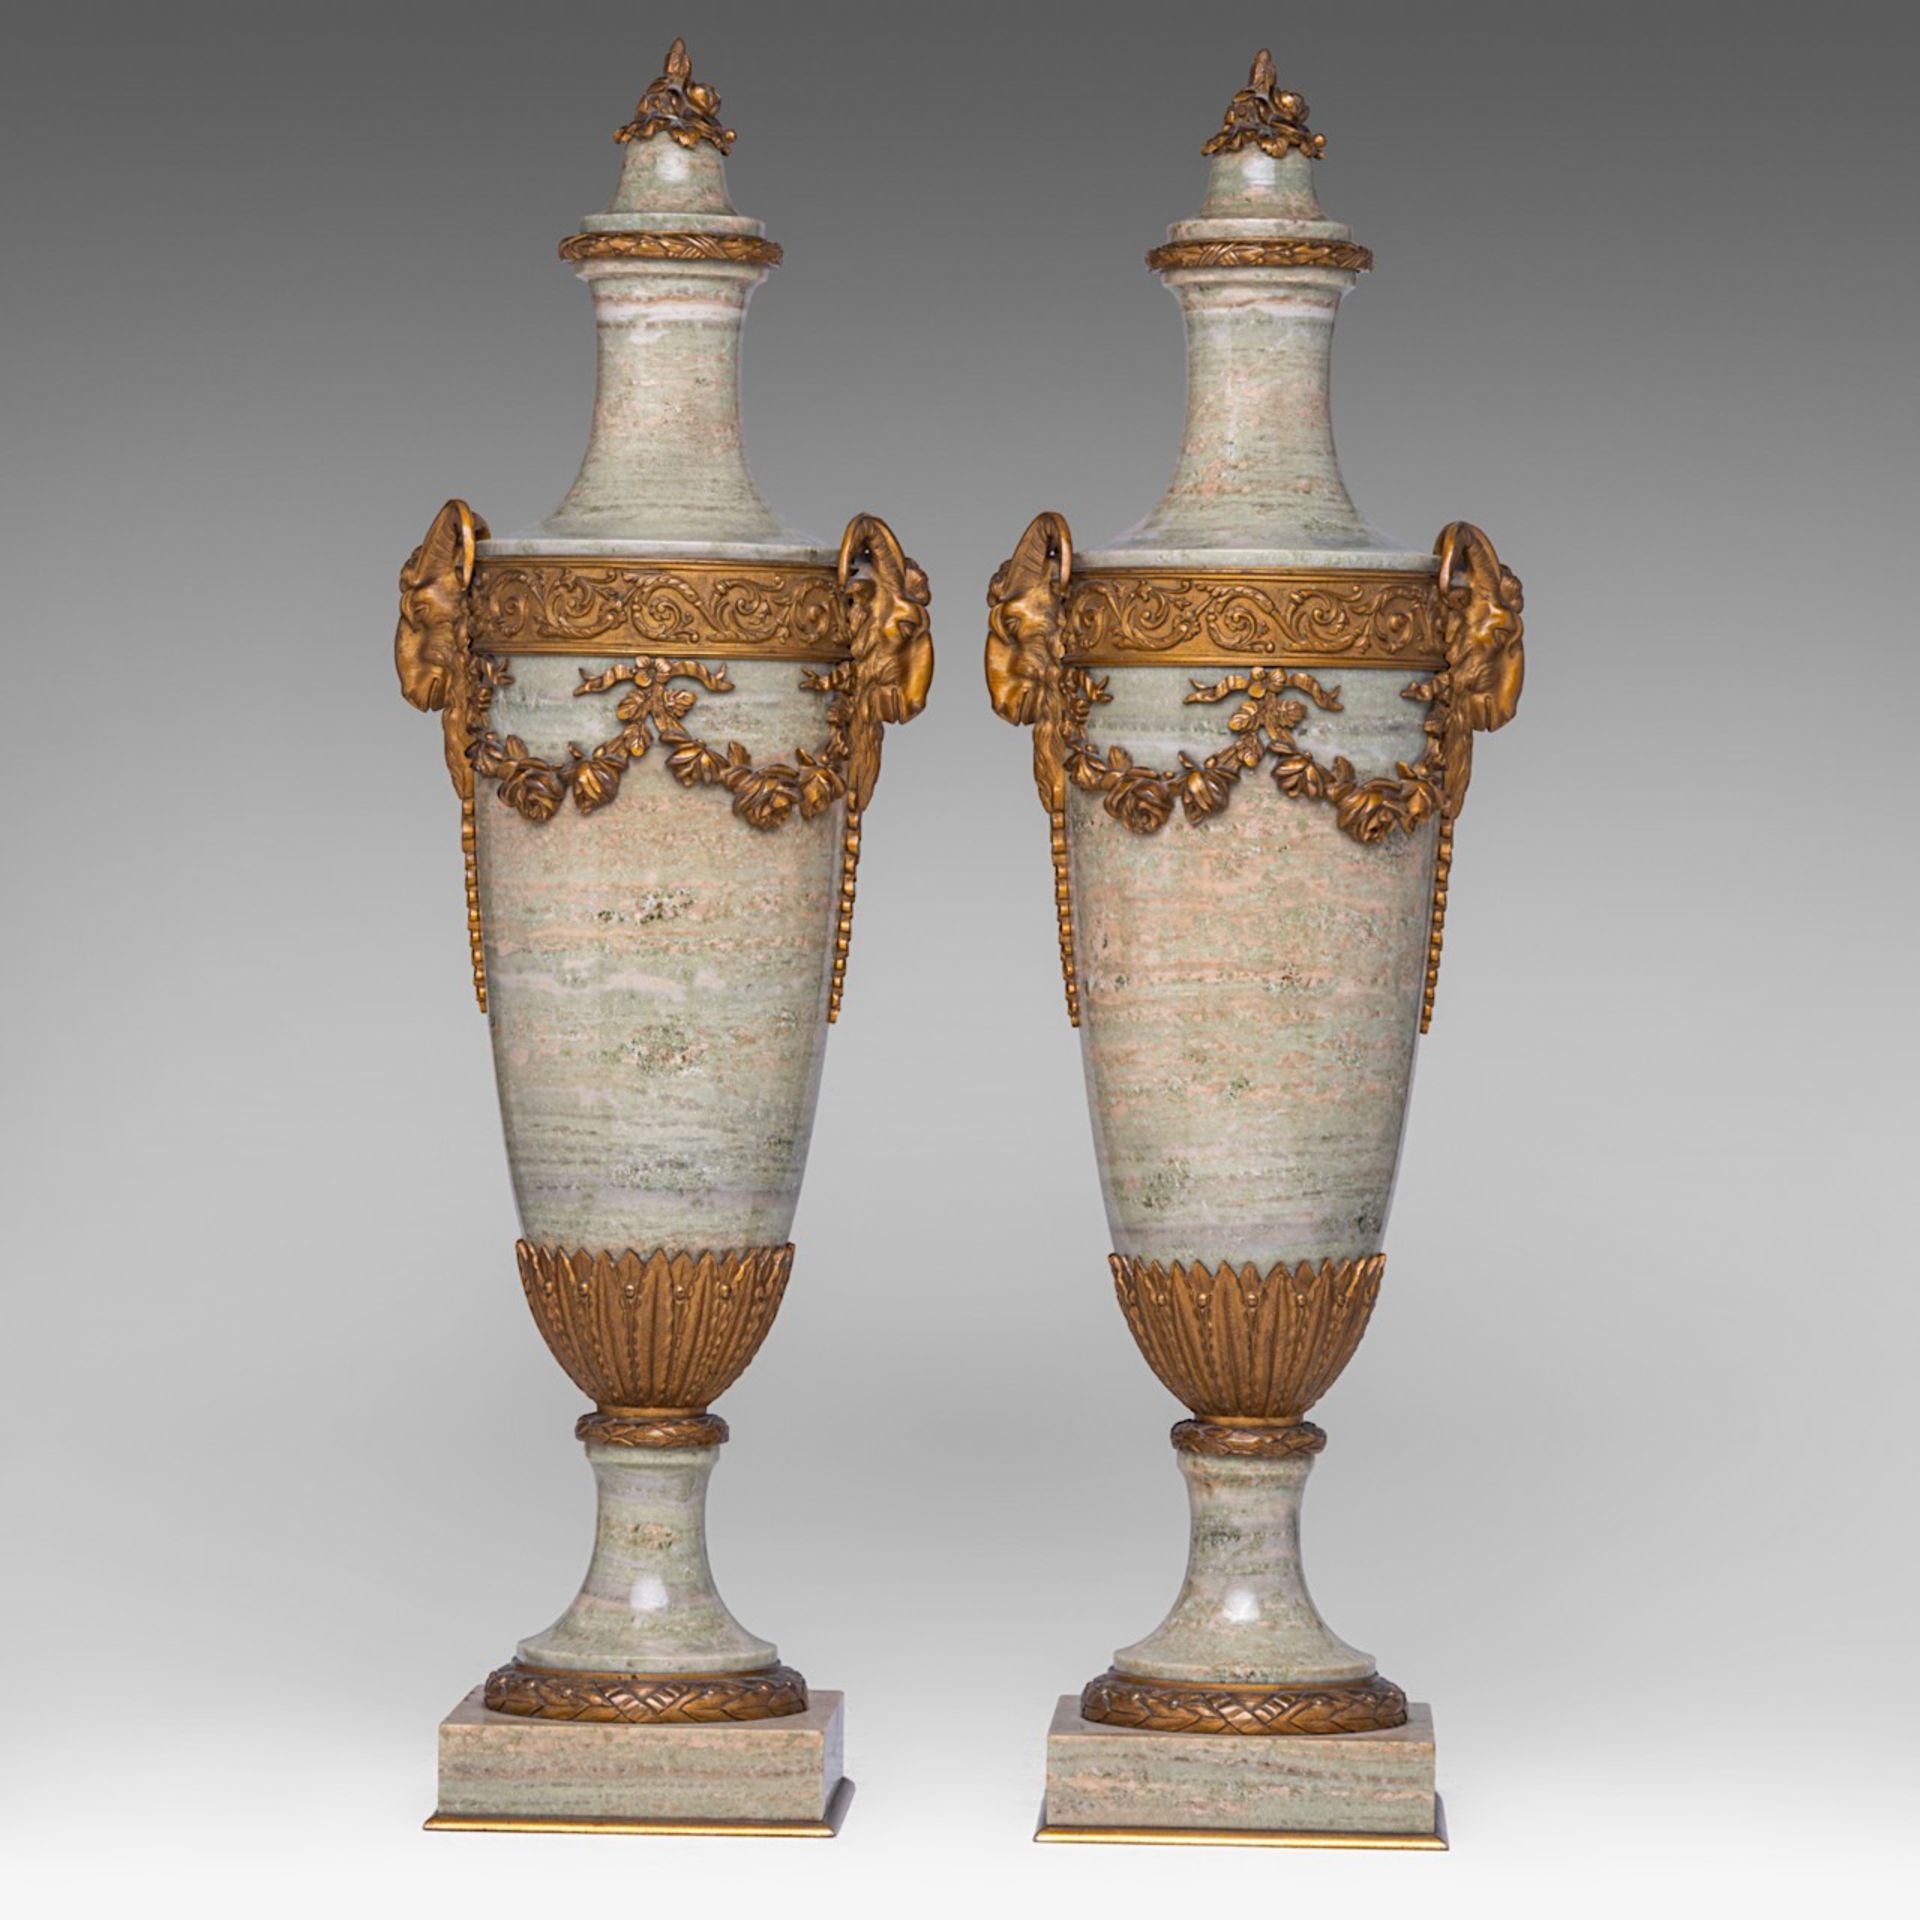 A fine pair of Neoclassical oblong cassolettes, marble with gilt bronze mounts, H 56 cm